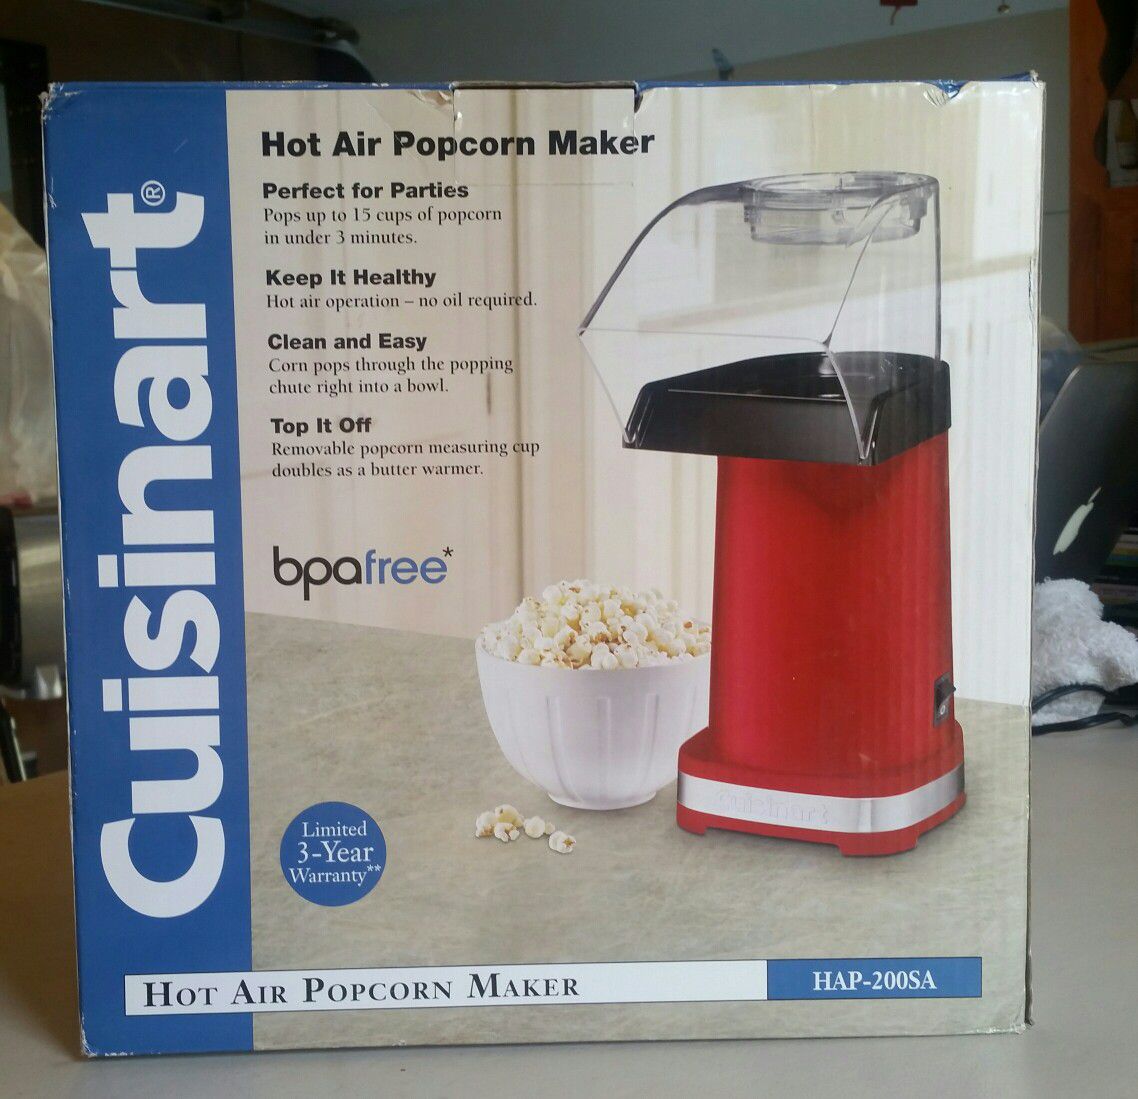 Dash Popcorn Maker 1400 Watts for Sale in Rancho Cucamonga, CA - OfferUp